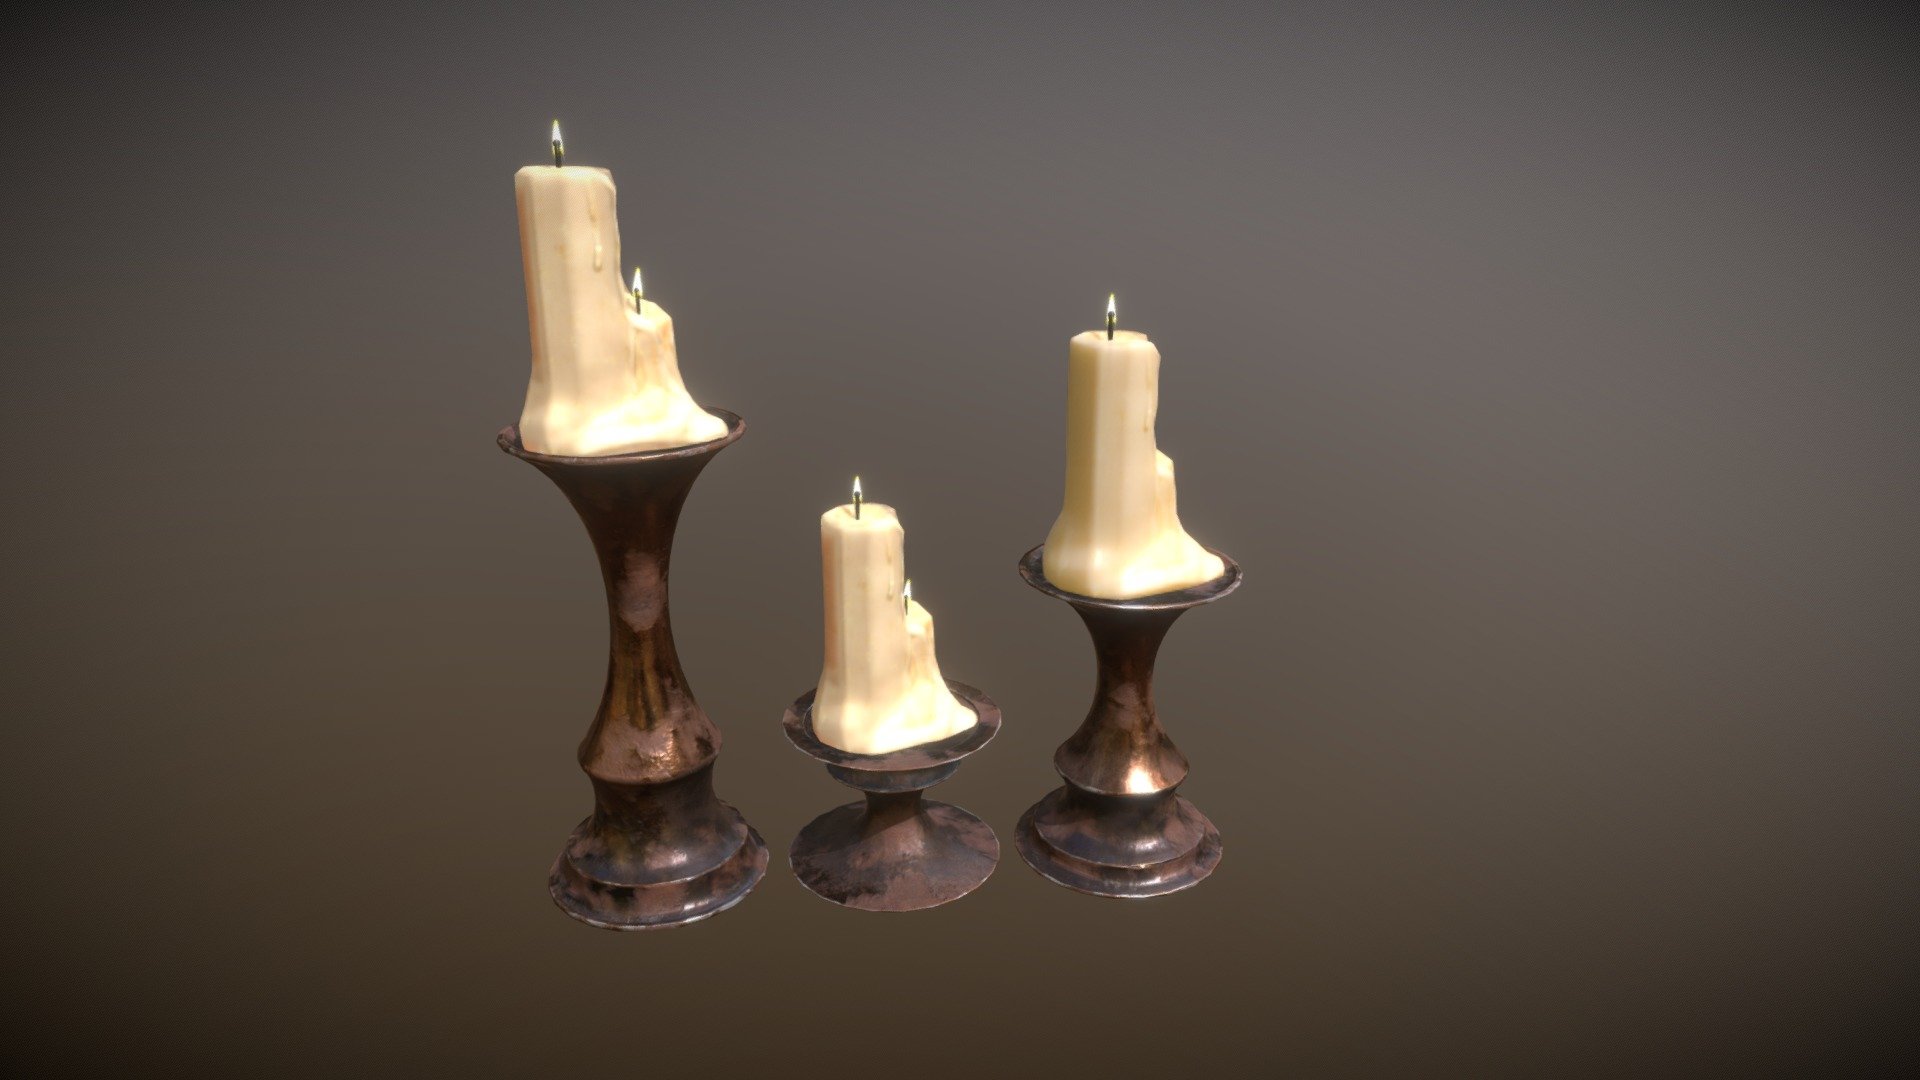 Antique Copper Candlestick Set 3D Model. This model contains the Antique Copper Candlestick Set itself 

All modeled in Maya, textured with Substance Painter.

The model was built to scale and is UV unwrapped properly. 

Contains TWO (2) Texture Sets: One for the candle and one for the Candle Holder  

⦁   11709 tris. 

⦁   Contains: .FBX .OBJ and .DAE

⦁   Model has clean topology. No Ngons.

⦁   Built to scale

⦁   Unwrapped UV Map

⦁   4K Texture set

⦁   High quality details

⦁   Based on real life references

⦁   Renders done in Marmoset Toolbag

Polycount: 

Verts 5991

Edges 11883

Faces 5928

Tris 11709 

If you have any questions please feel free to ask me 3d model